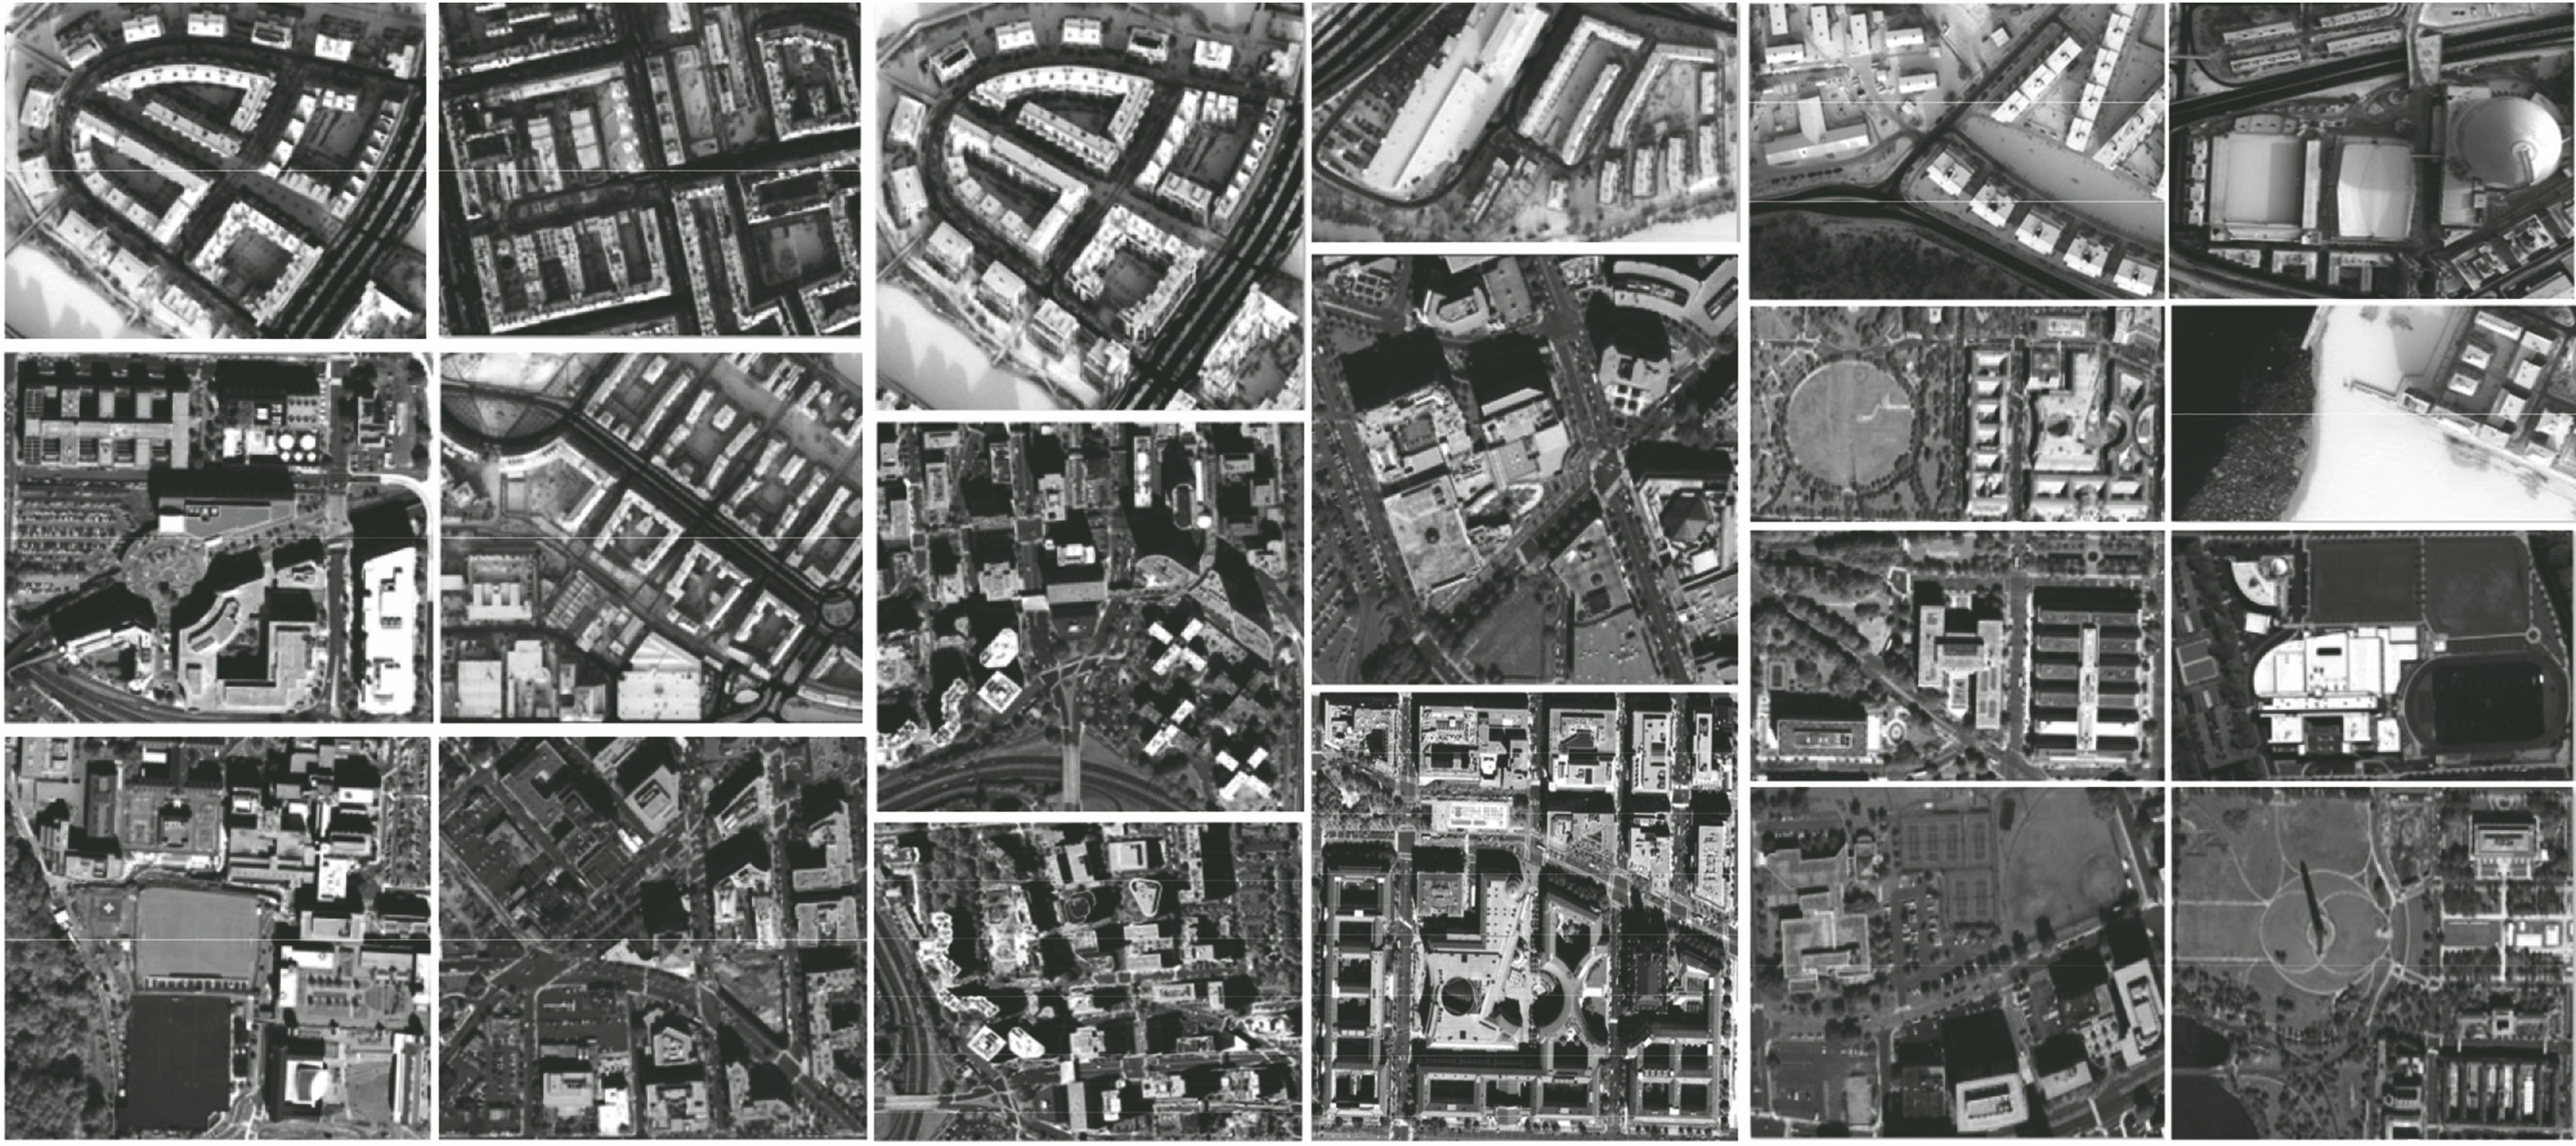 Left images of the original satellite stereo images in the database